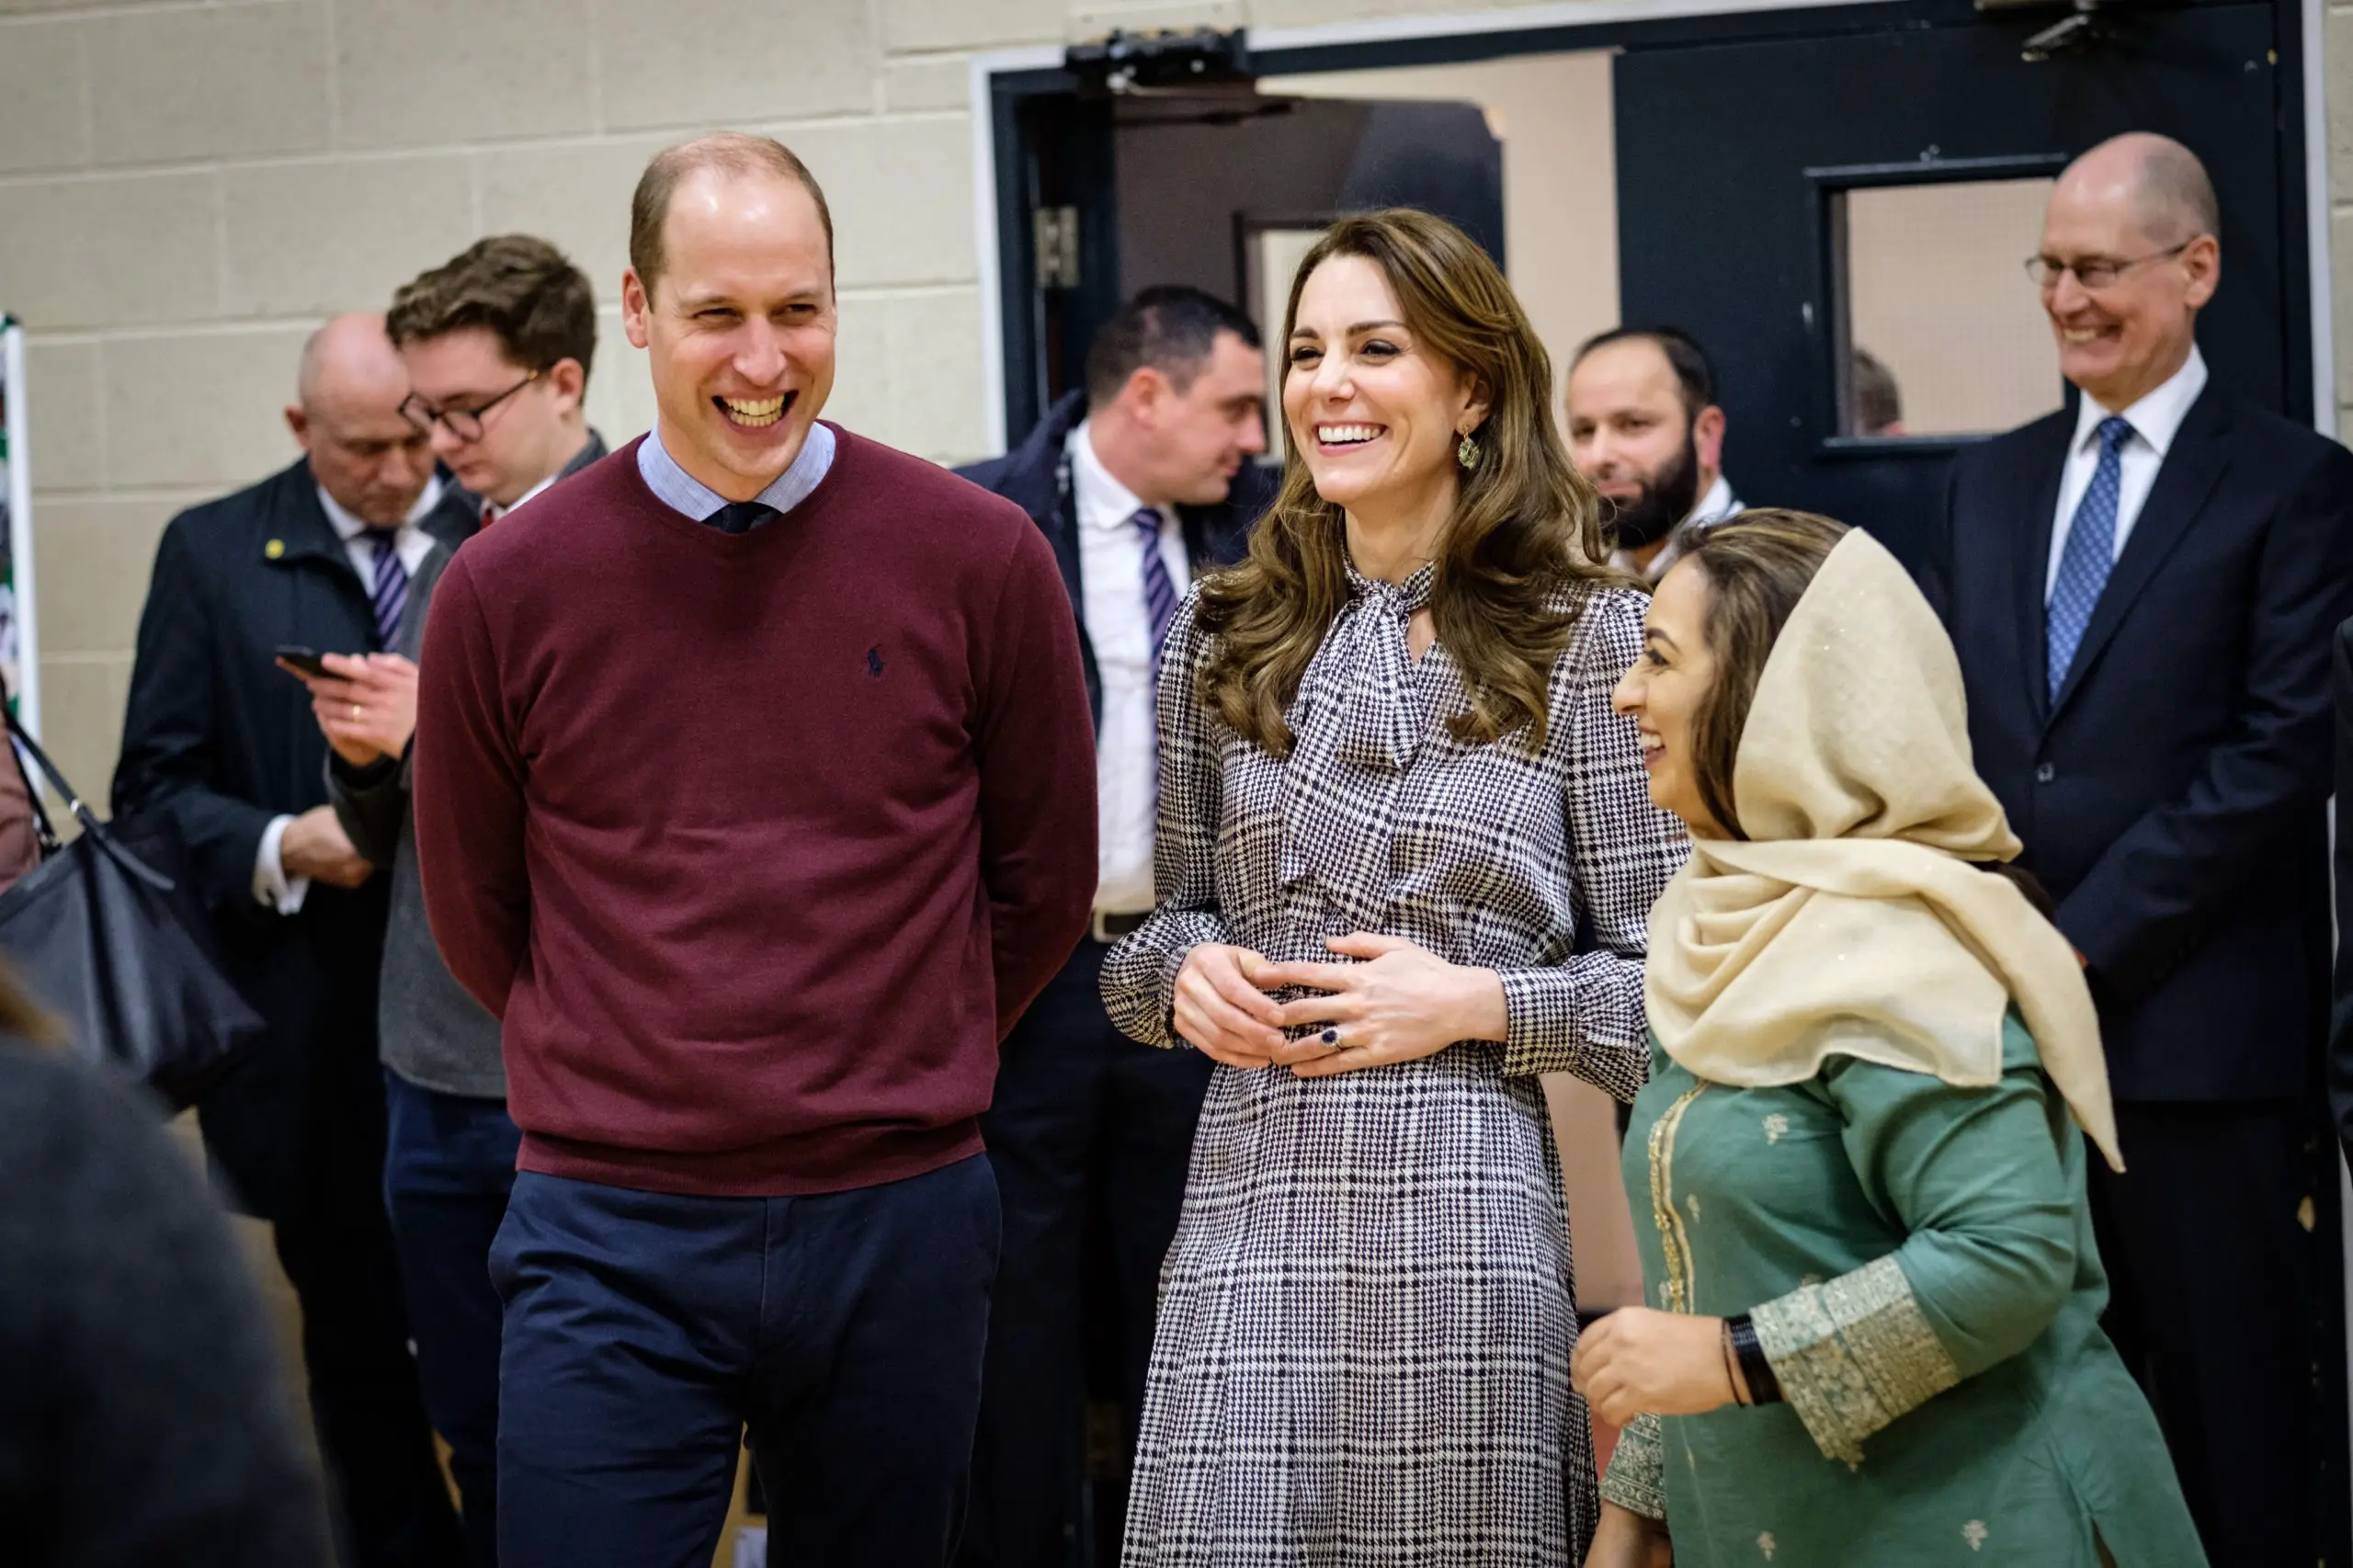 The Duchess of Cambridge in grey Zara dress during a visit to Bradford